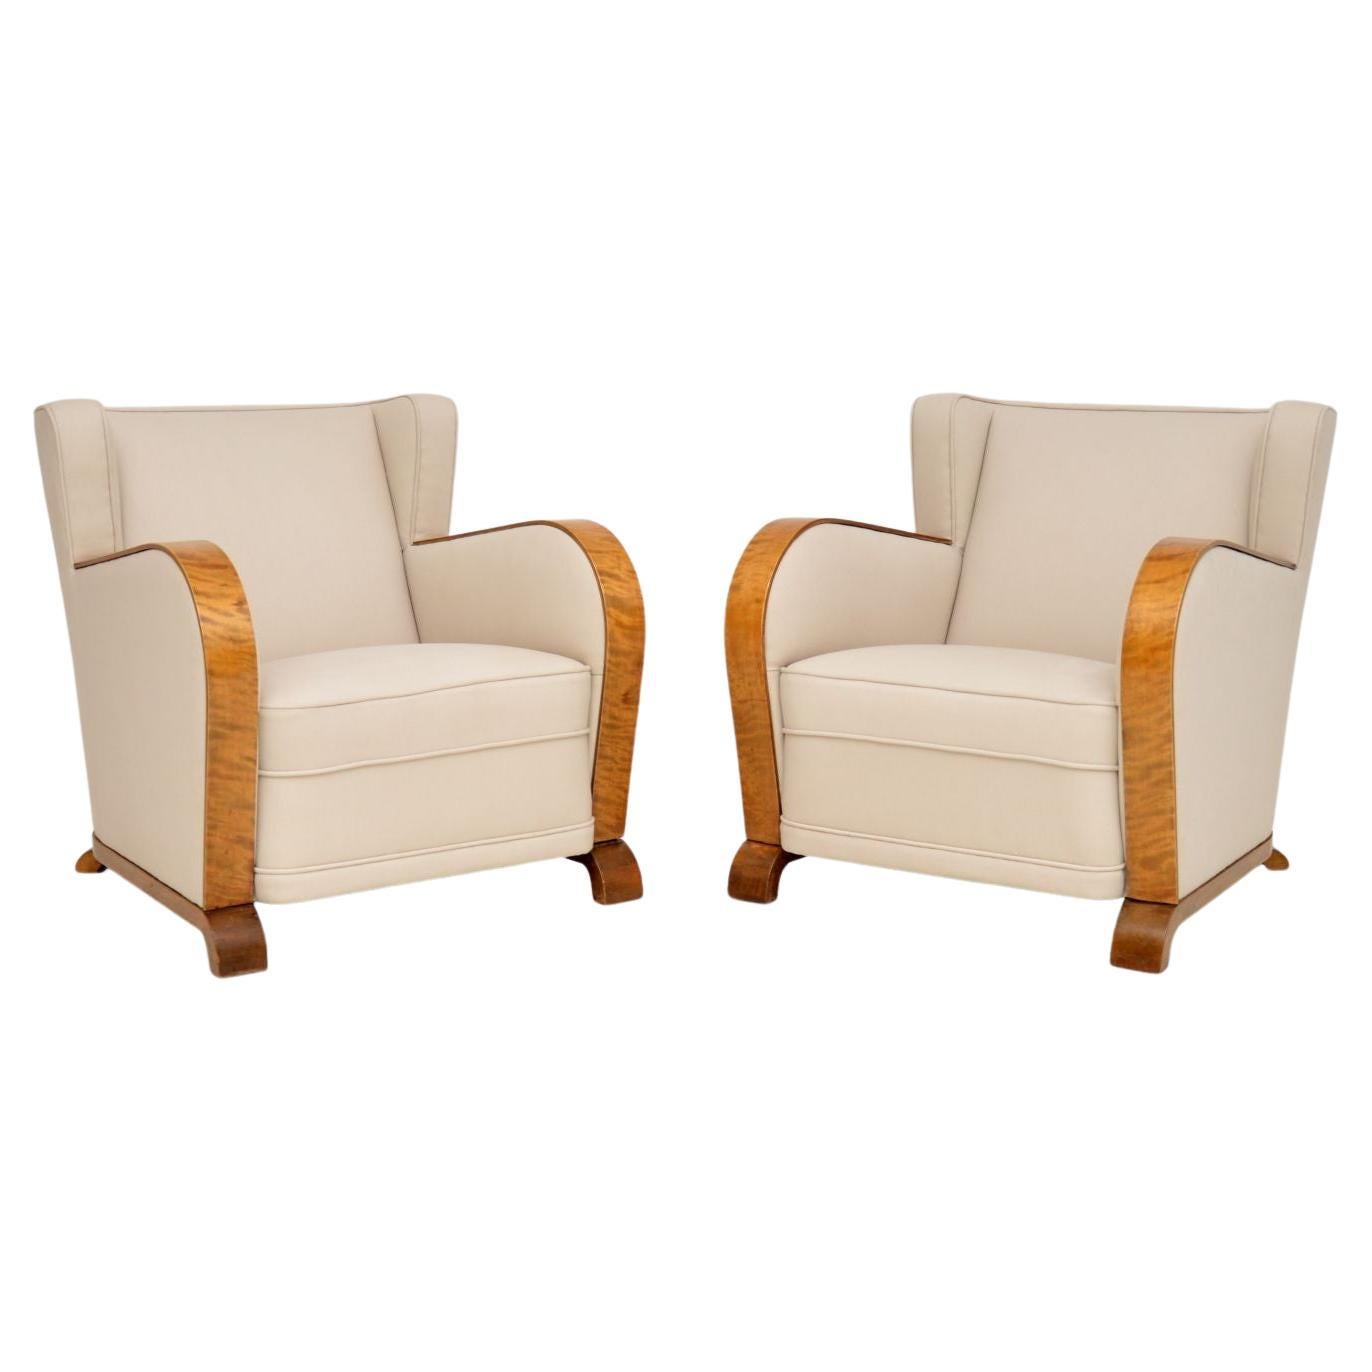 1920's Pair of Finnish Art Deco Satin Birch Armchairs For Sale